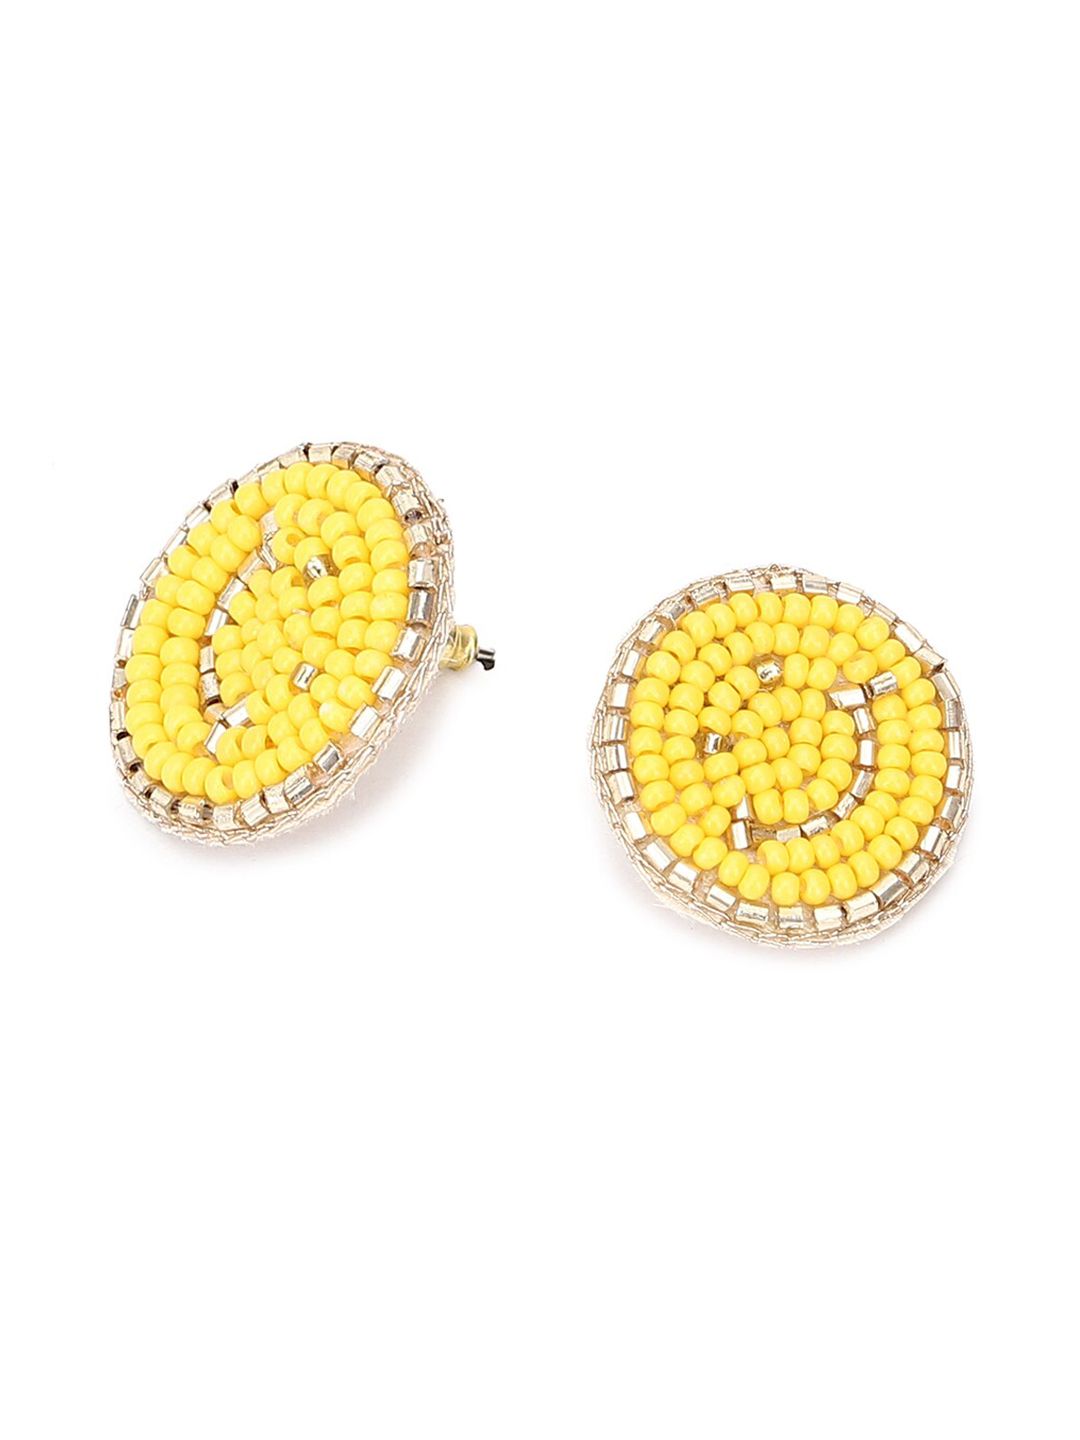 FOREVER 21 Yellow Beaded Contemporary Studs Earrings Price in India